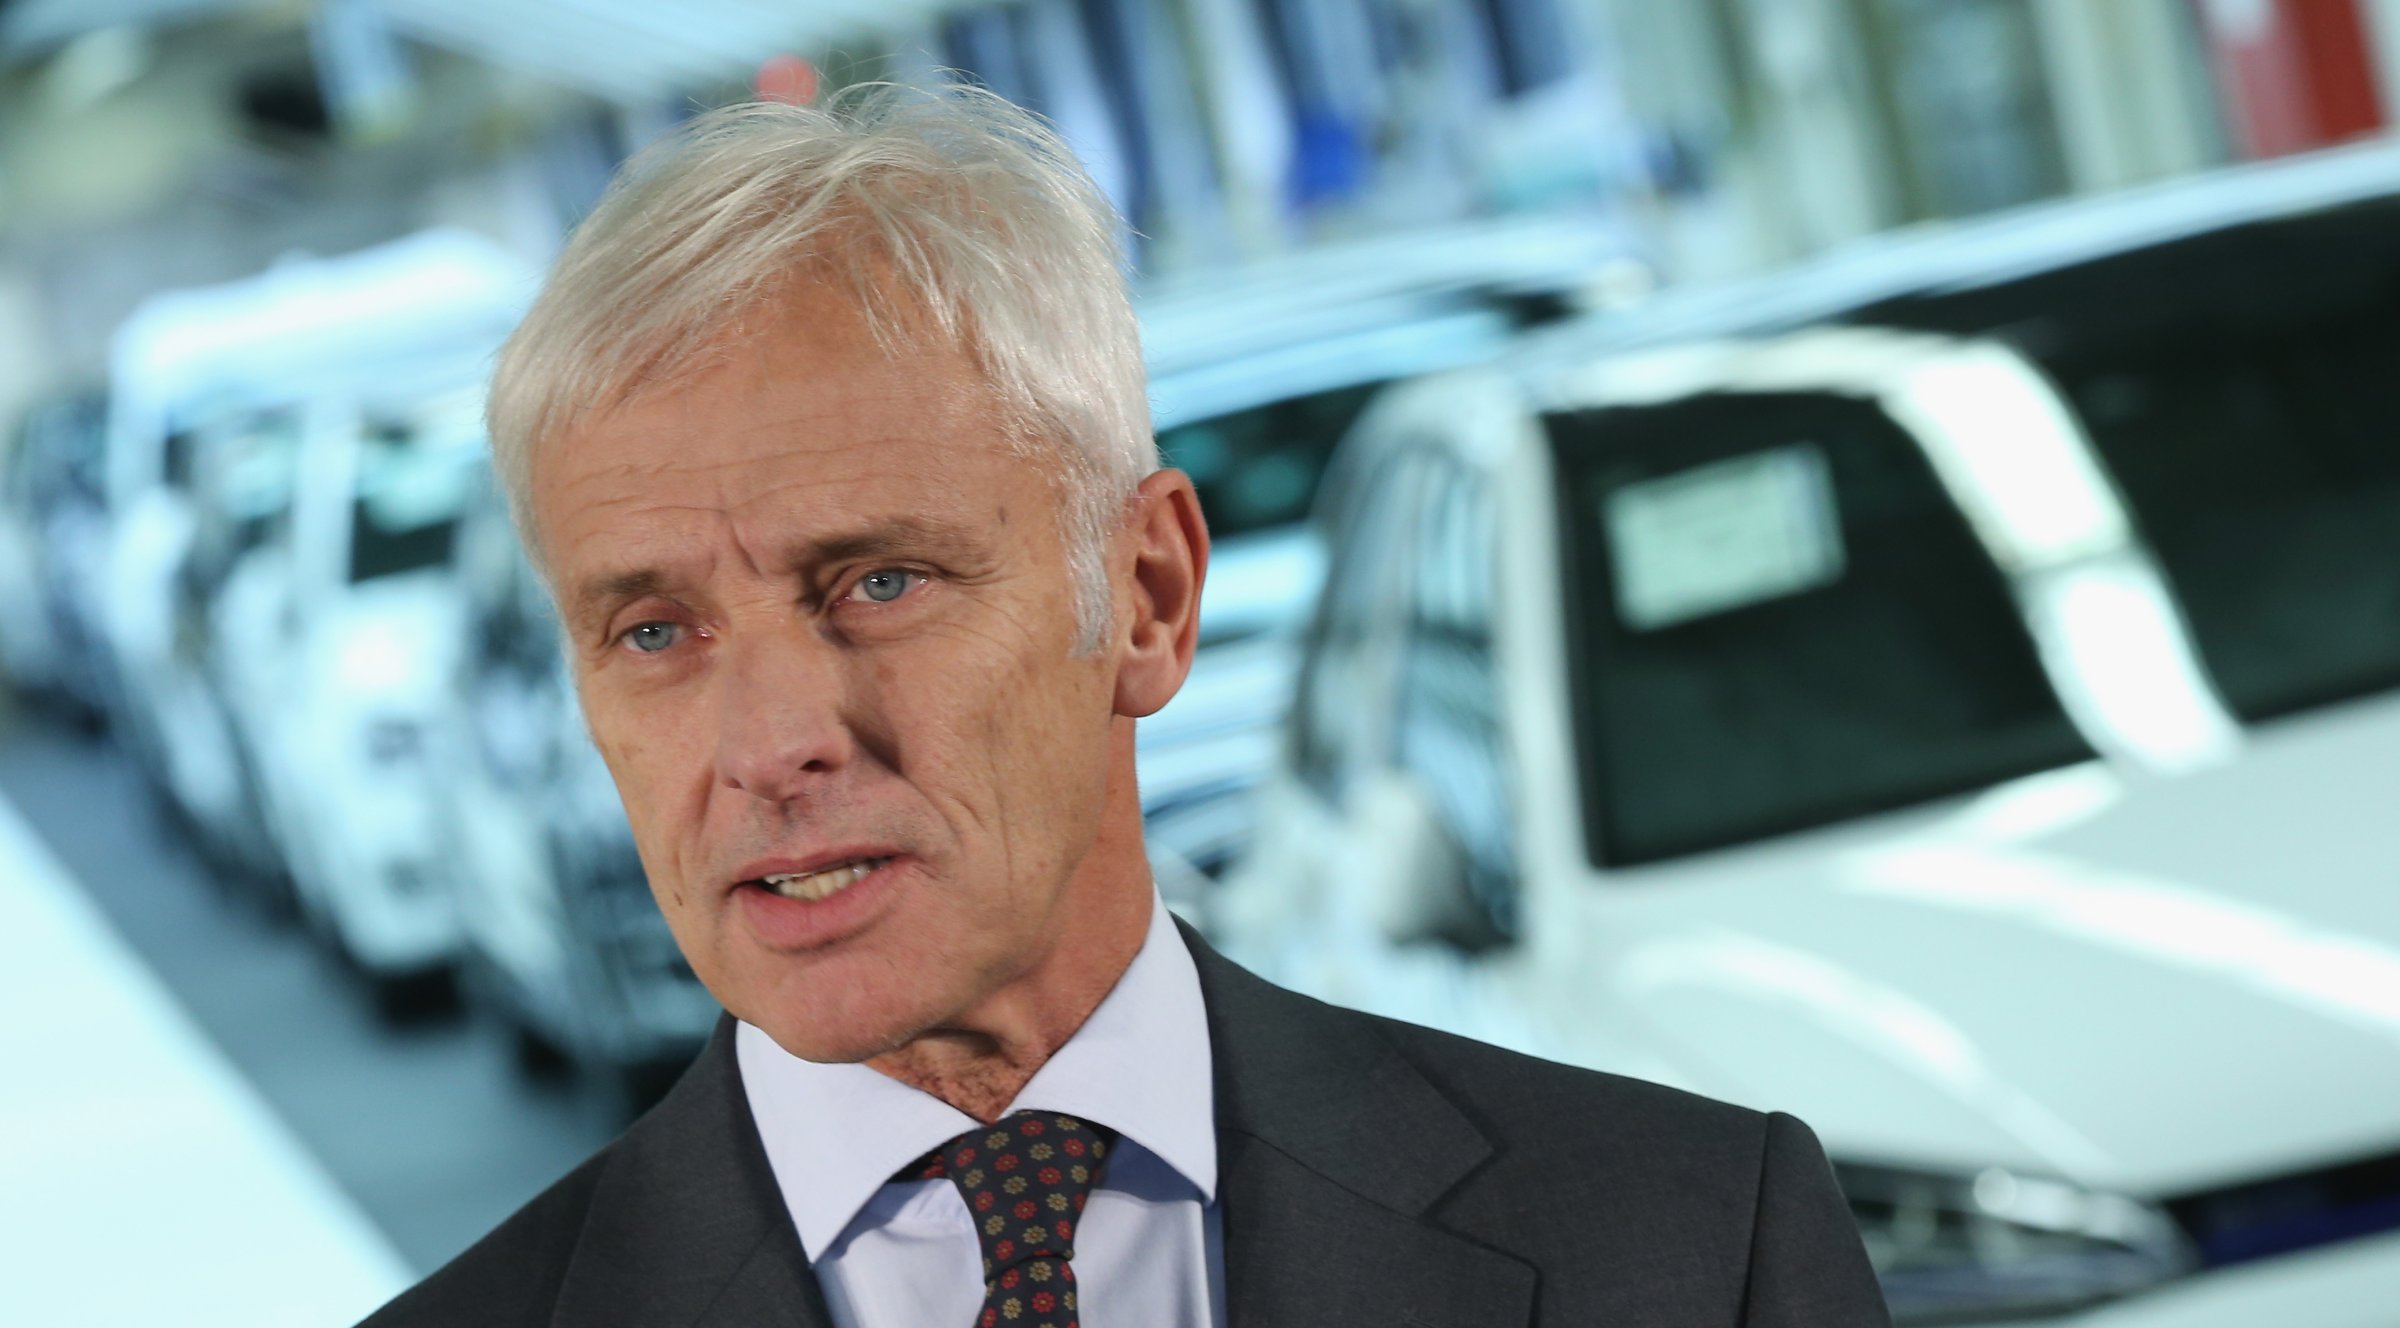 Lower Saxony Governor Weil Visits Volkswagen Factory